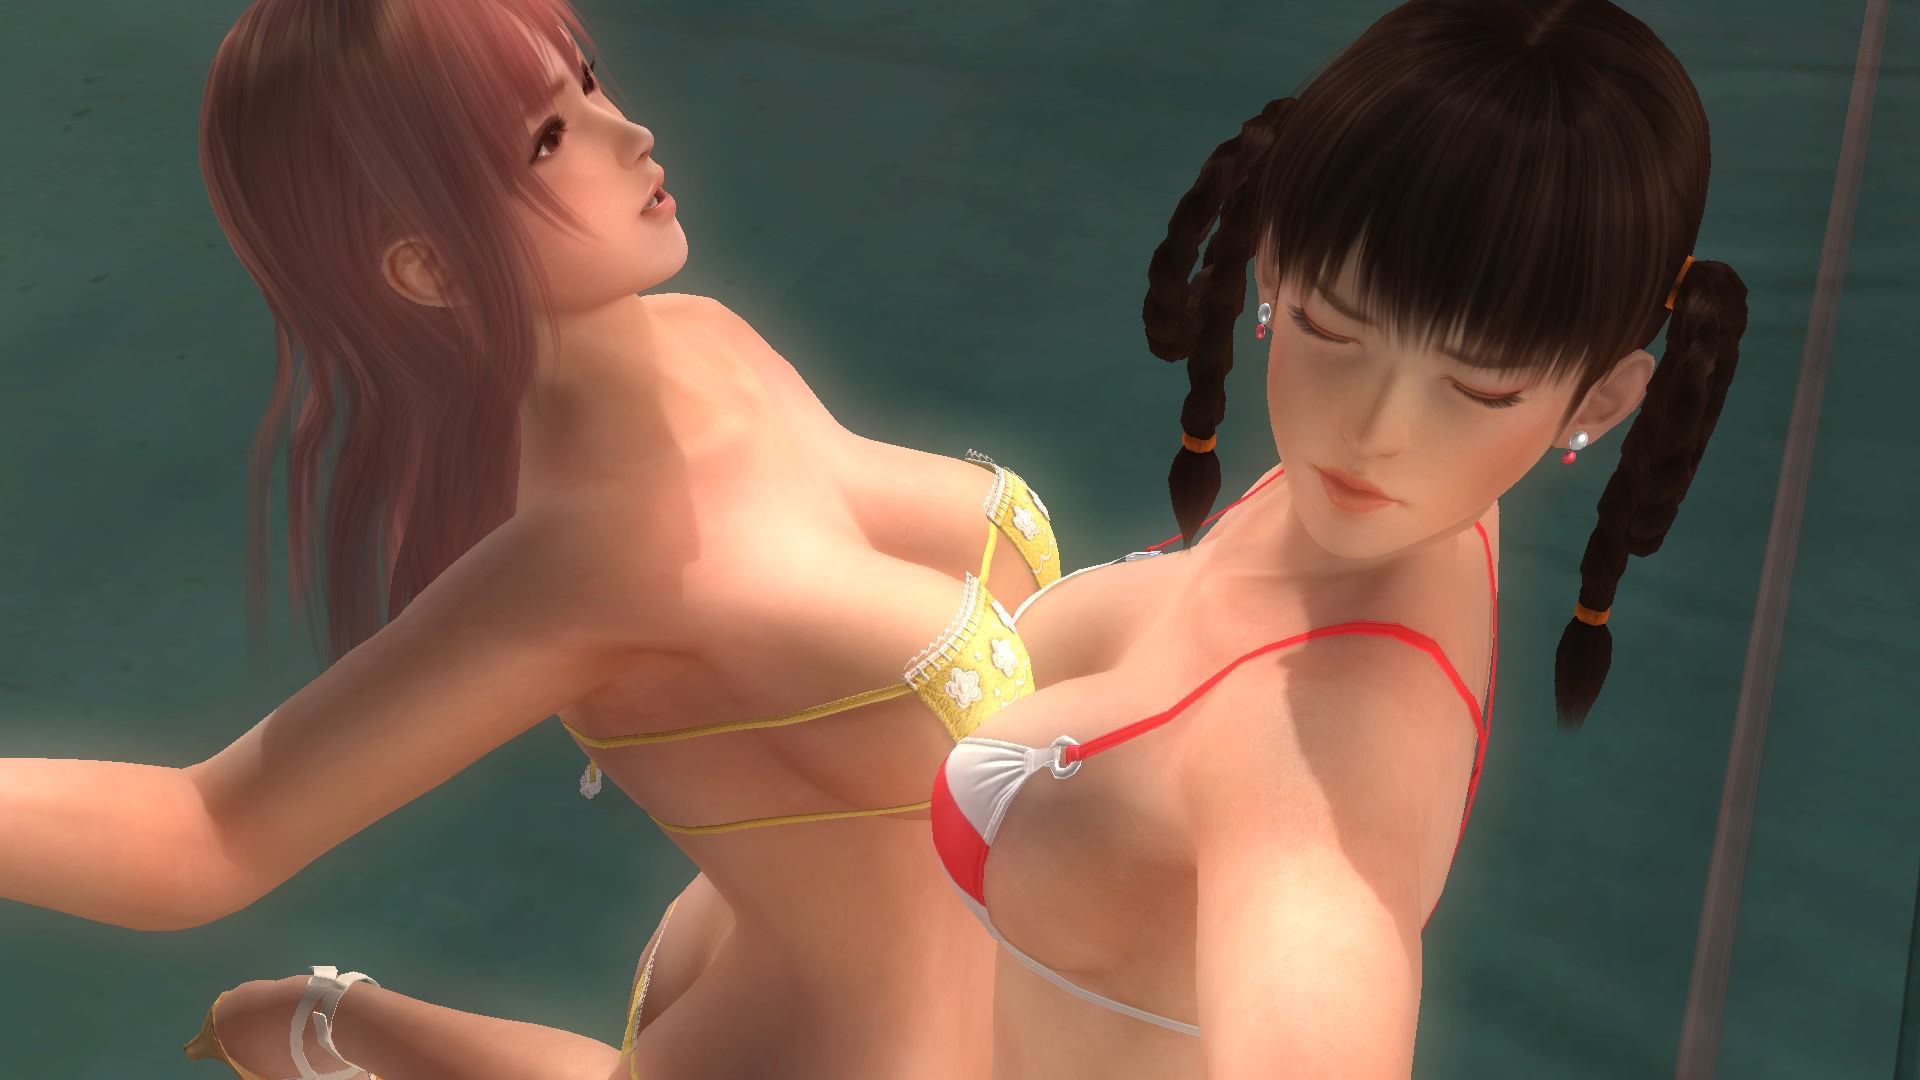 Small Tip: delicate breasts fit neatly 6